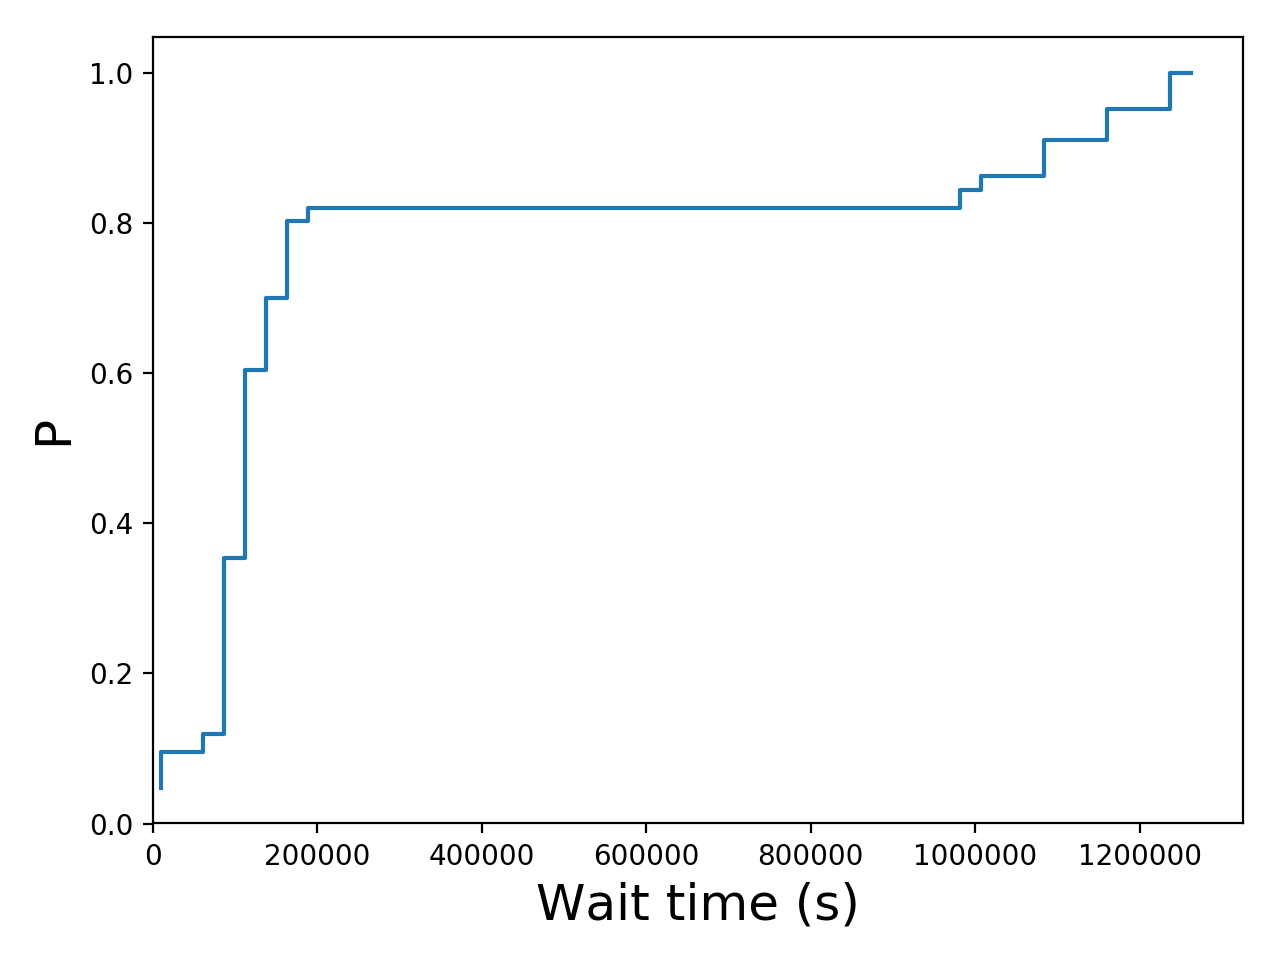 Task wait time CDF graph for the Pegasus_P1 trace.